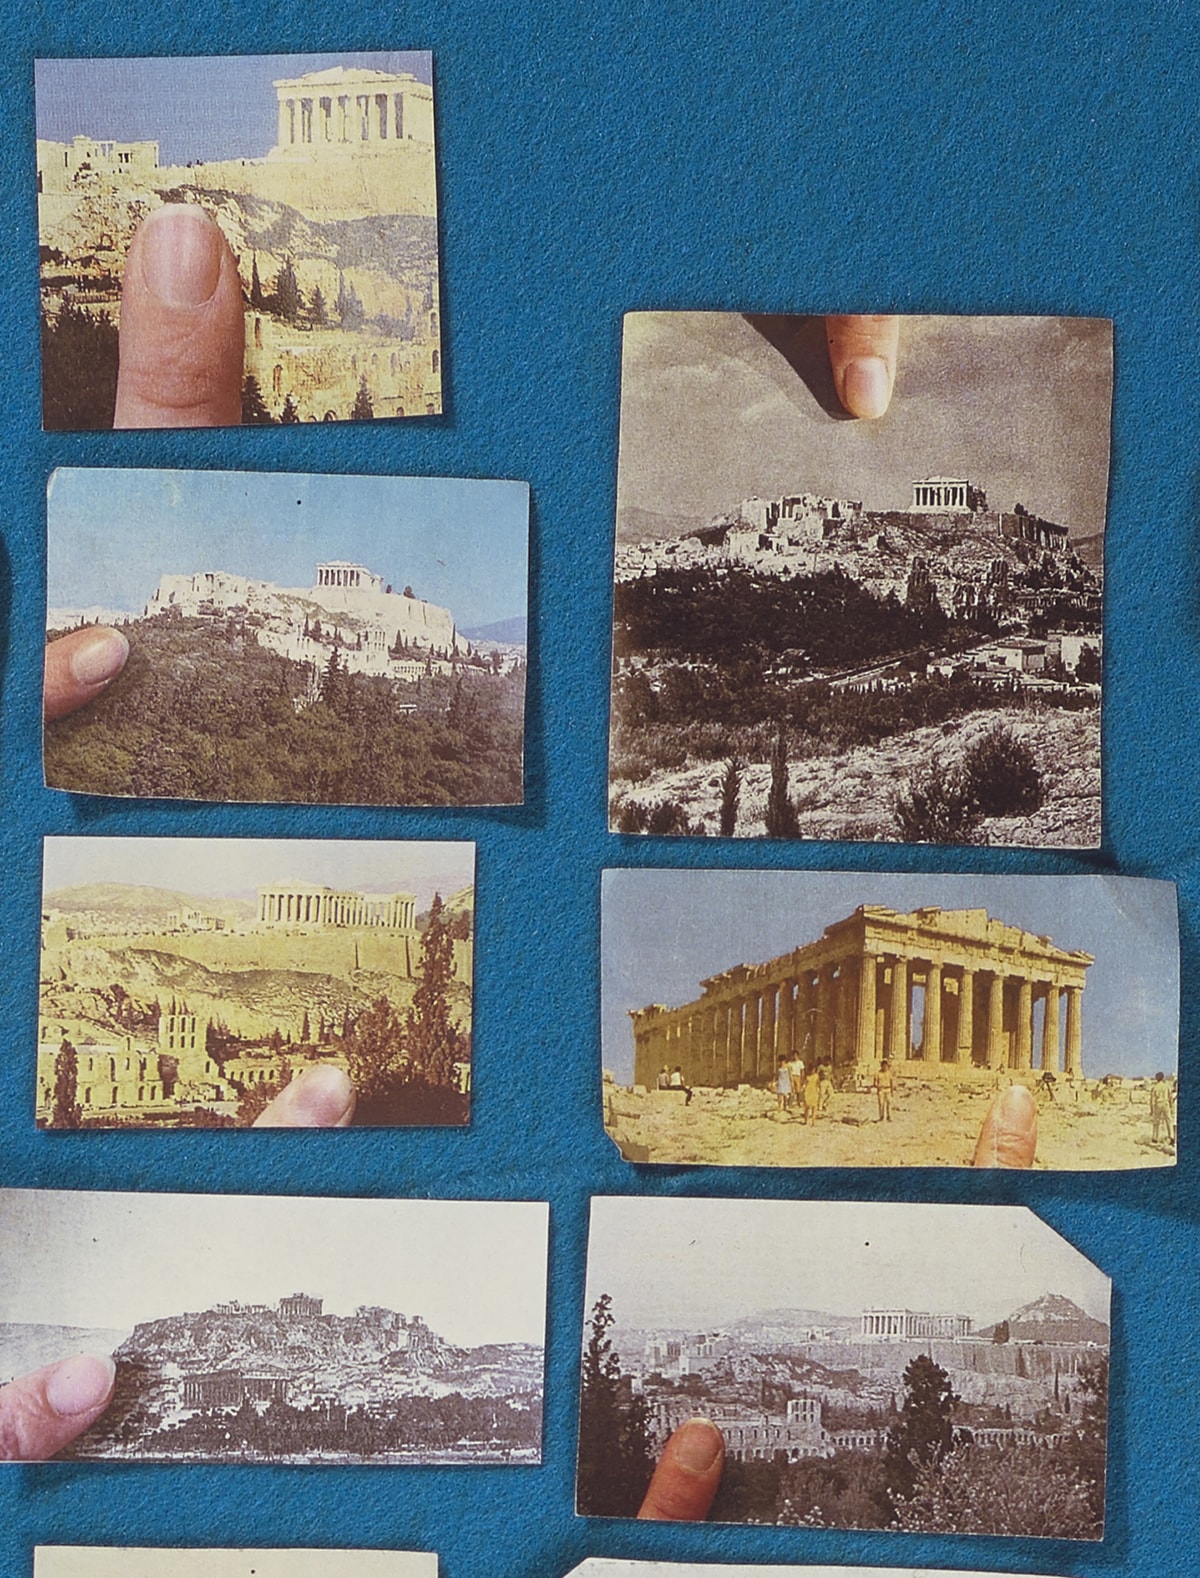 Detail: View of the artwork showing two vertical rows of images. The first row contains four pictures of the Acropolis, the first three in color and the last in black and white. The second row has three clippings, the first and last in black and white and the third in color. Each show the Acropolis from a different viewpoint, close-up or from afar. They also contain the image of a fingertip.